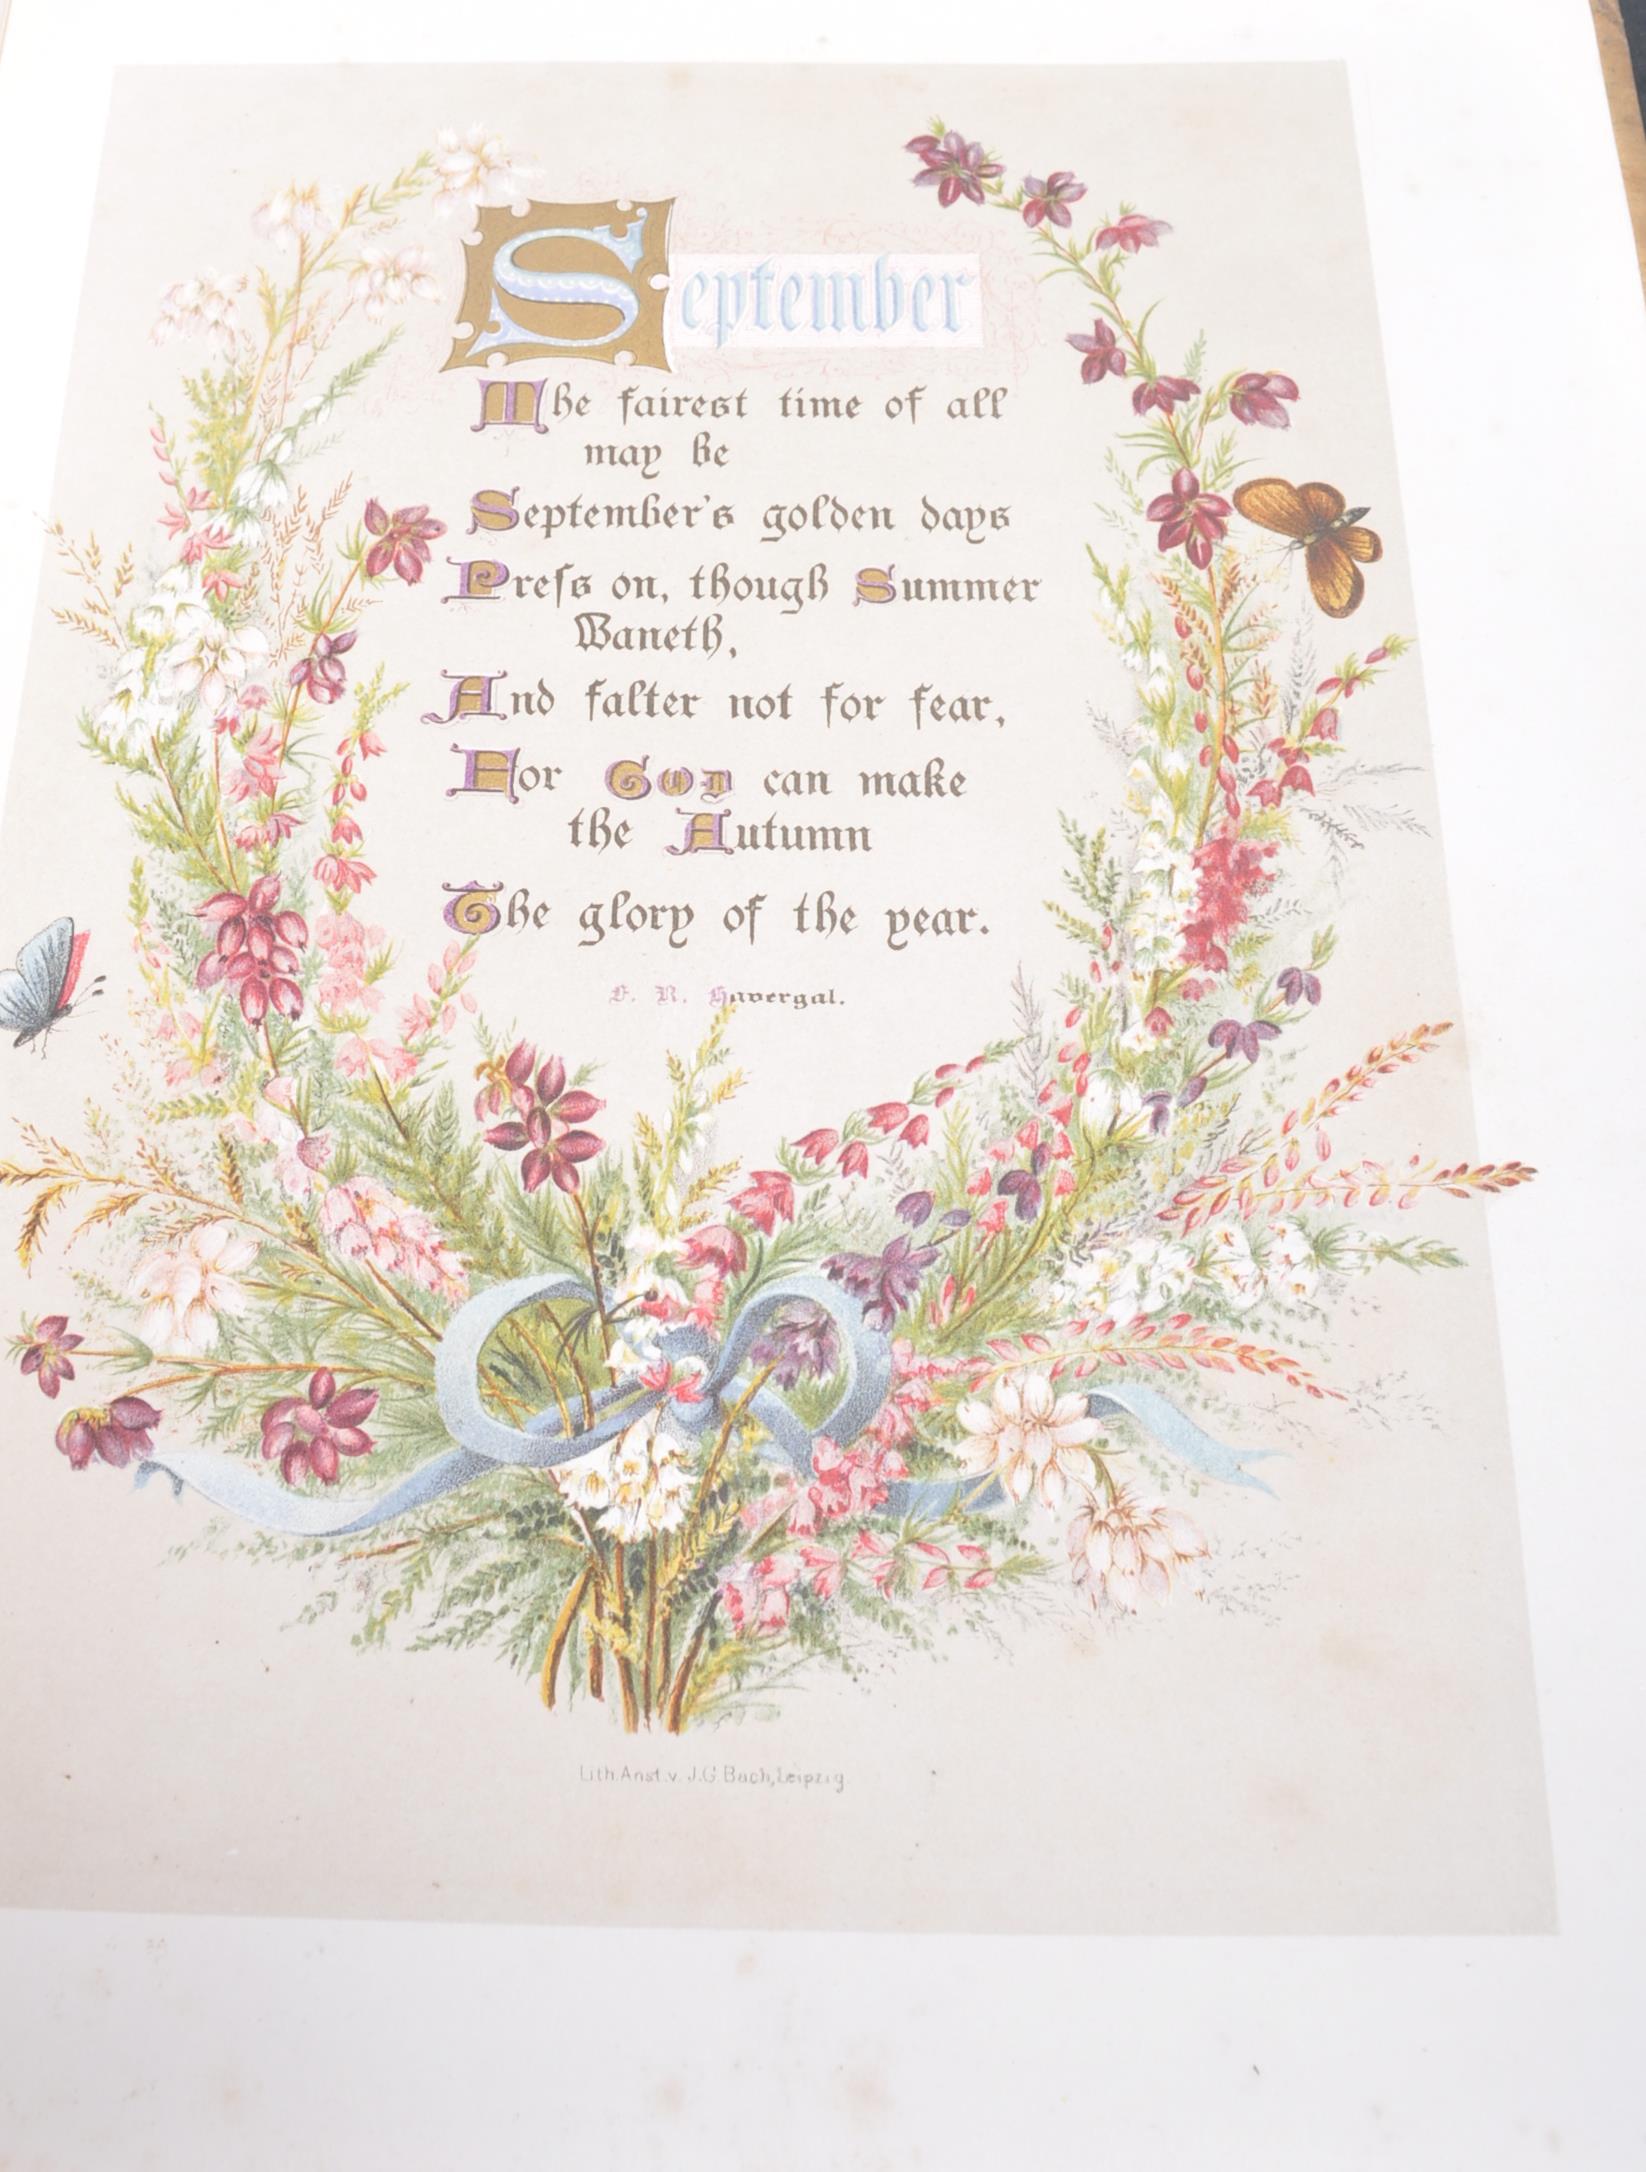 VICTORIAN BIRTHDAY BOOK MESSAGES NOTABLE CELEBRITIES - Image 6 of 6